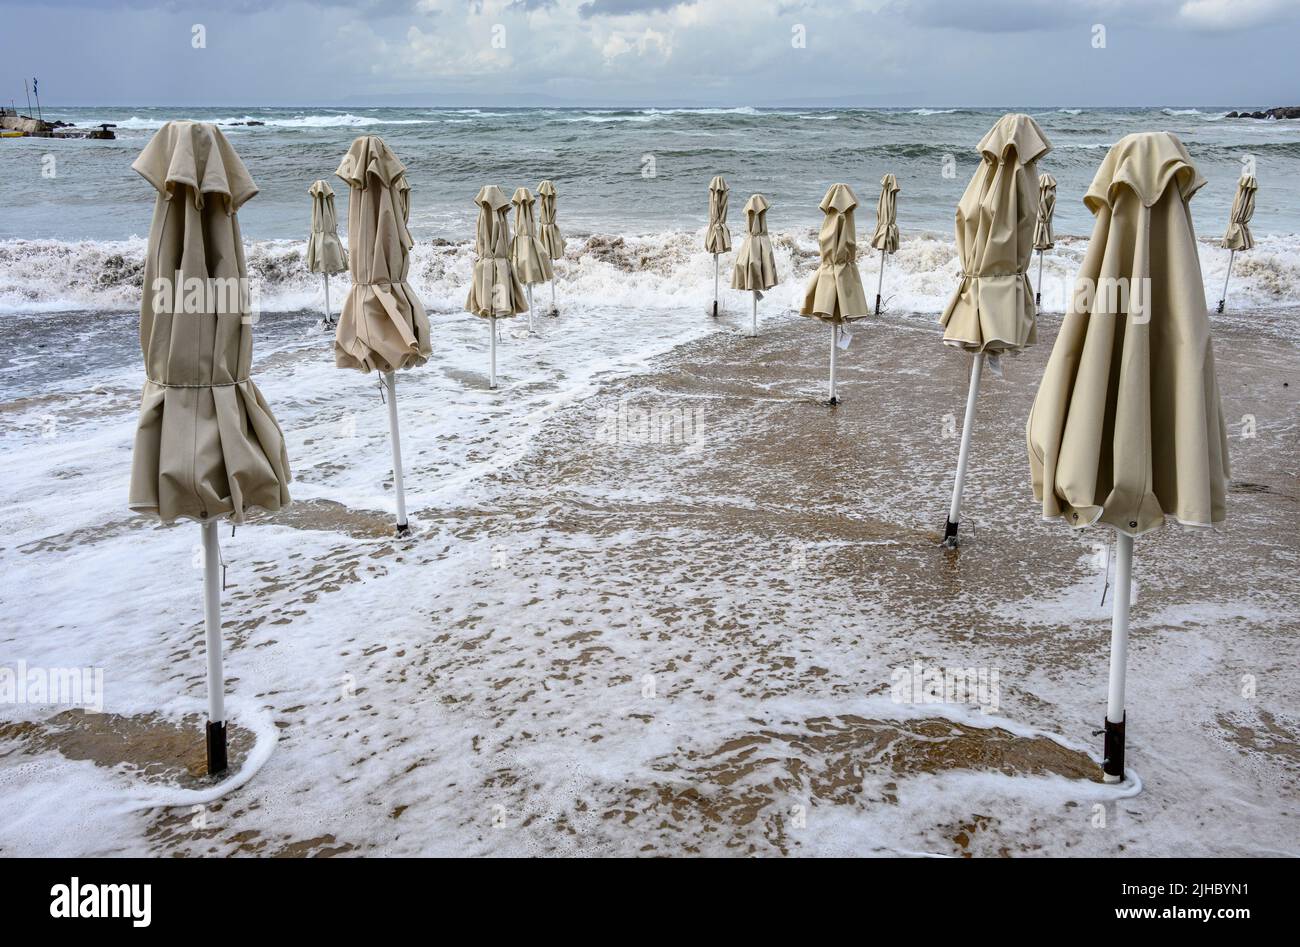 A late season storm causes waves to inundate the beach and beach umbrellas at the little resort of Stoupa in the Outer Mani, Messinia, Peloponnese, Gr Stock Photo